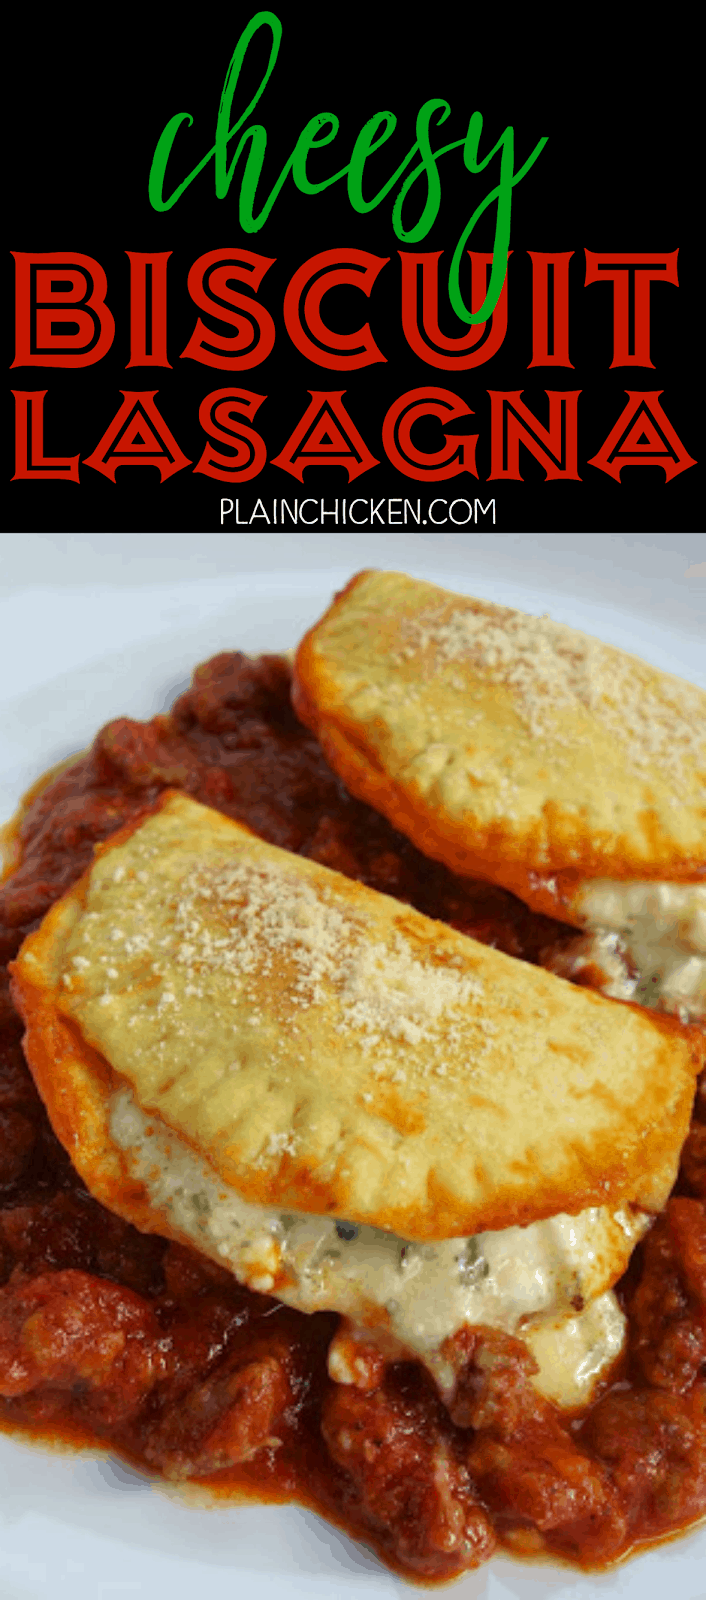 Cheesy Biscuit Lasagna - Biscuits stuffed with cheese and baked in a meat sauce - all the flavors of lasagna that is ready in under 30 minutes! Everyone LOVED this casserole! Fun  twist to traditional lasagna.